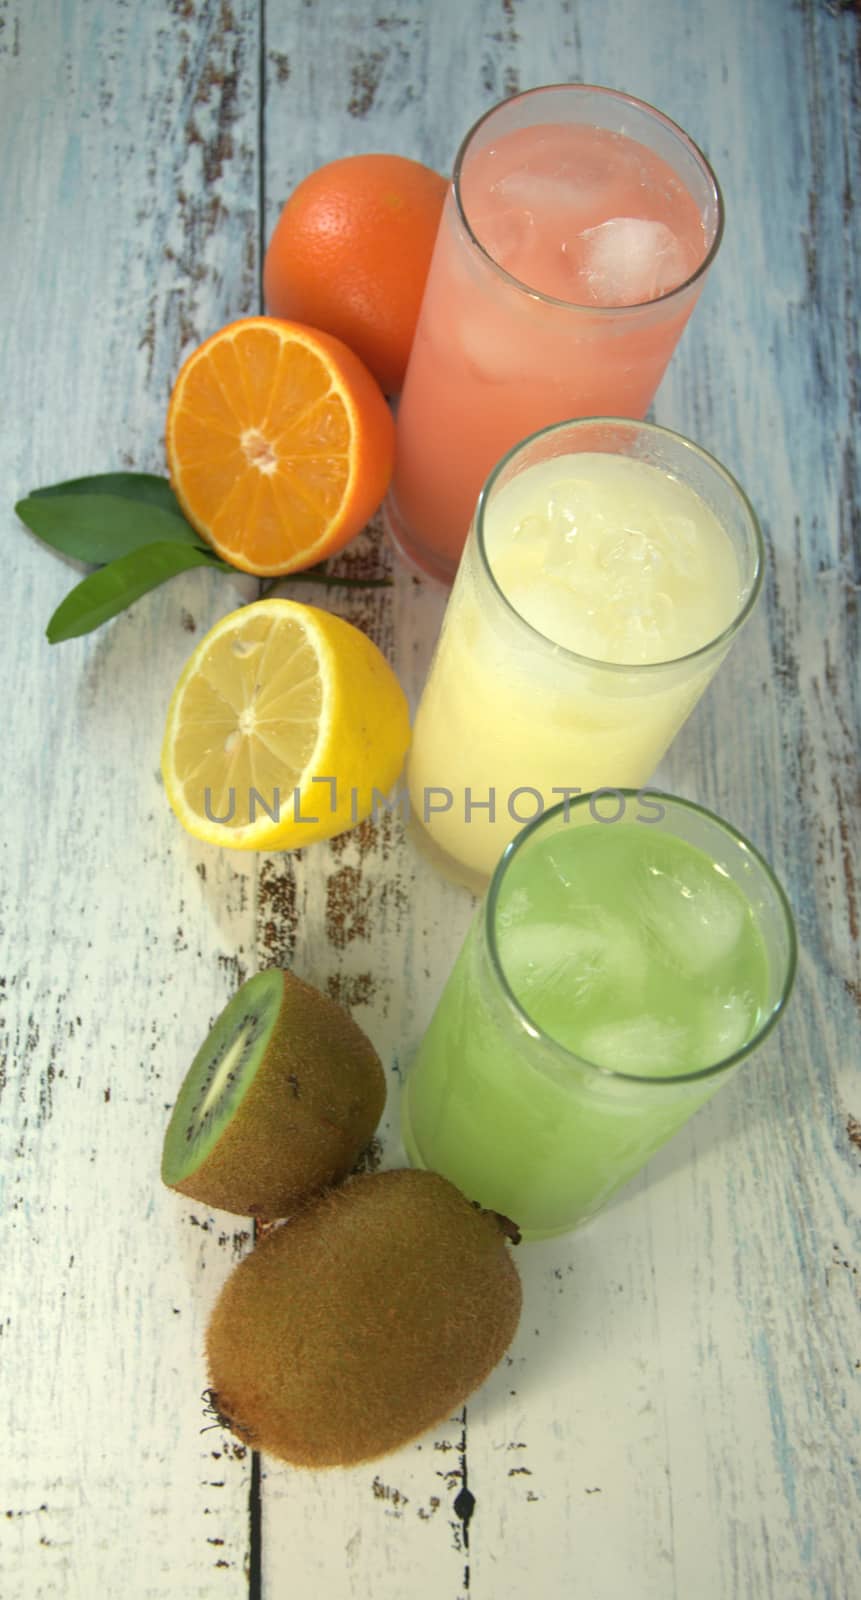 Three glass glasses with a refreshing juice and ice, on a textile stand, whole and sliced half of an orange with leaves, lemon and kiwi, lay on a white wooden table. Close-up.